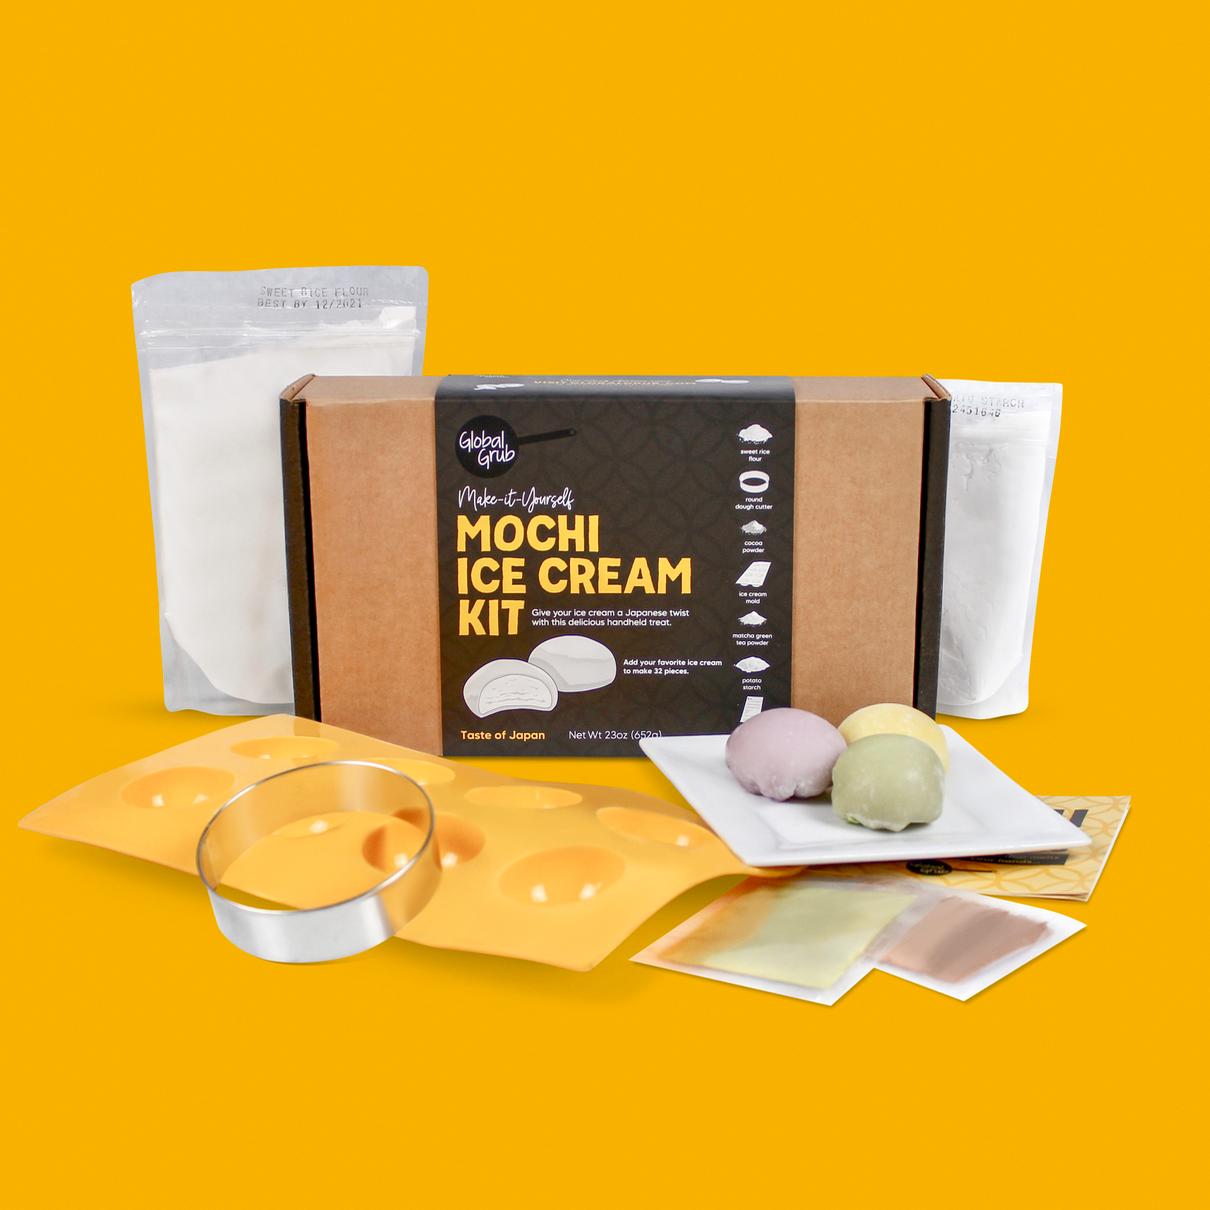 Mochi Kit includes sweet rice flour, potato starch, cocoa, green tea, ice cream mold, dough cutter, cooking instructions